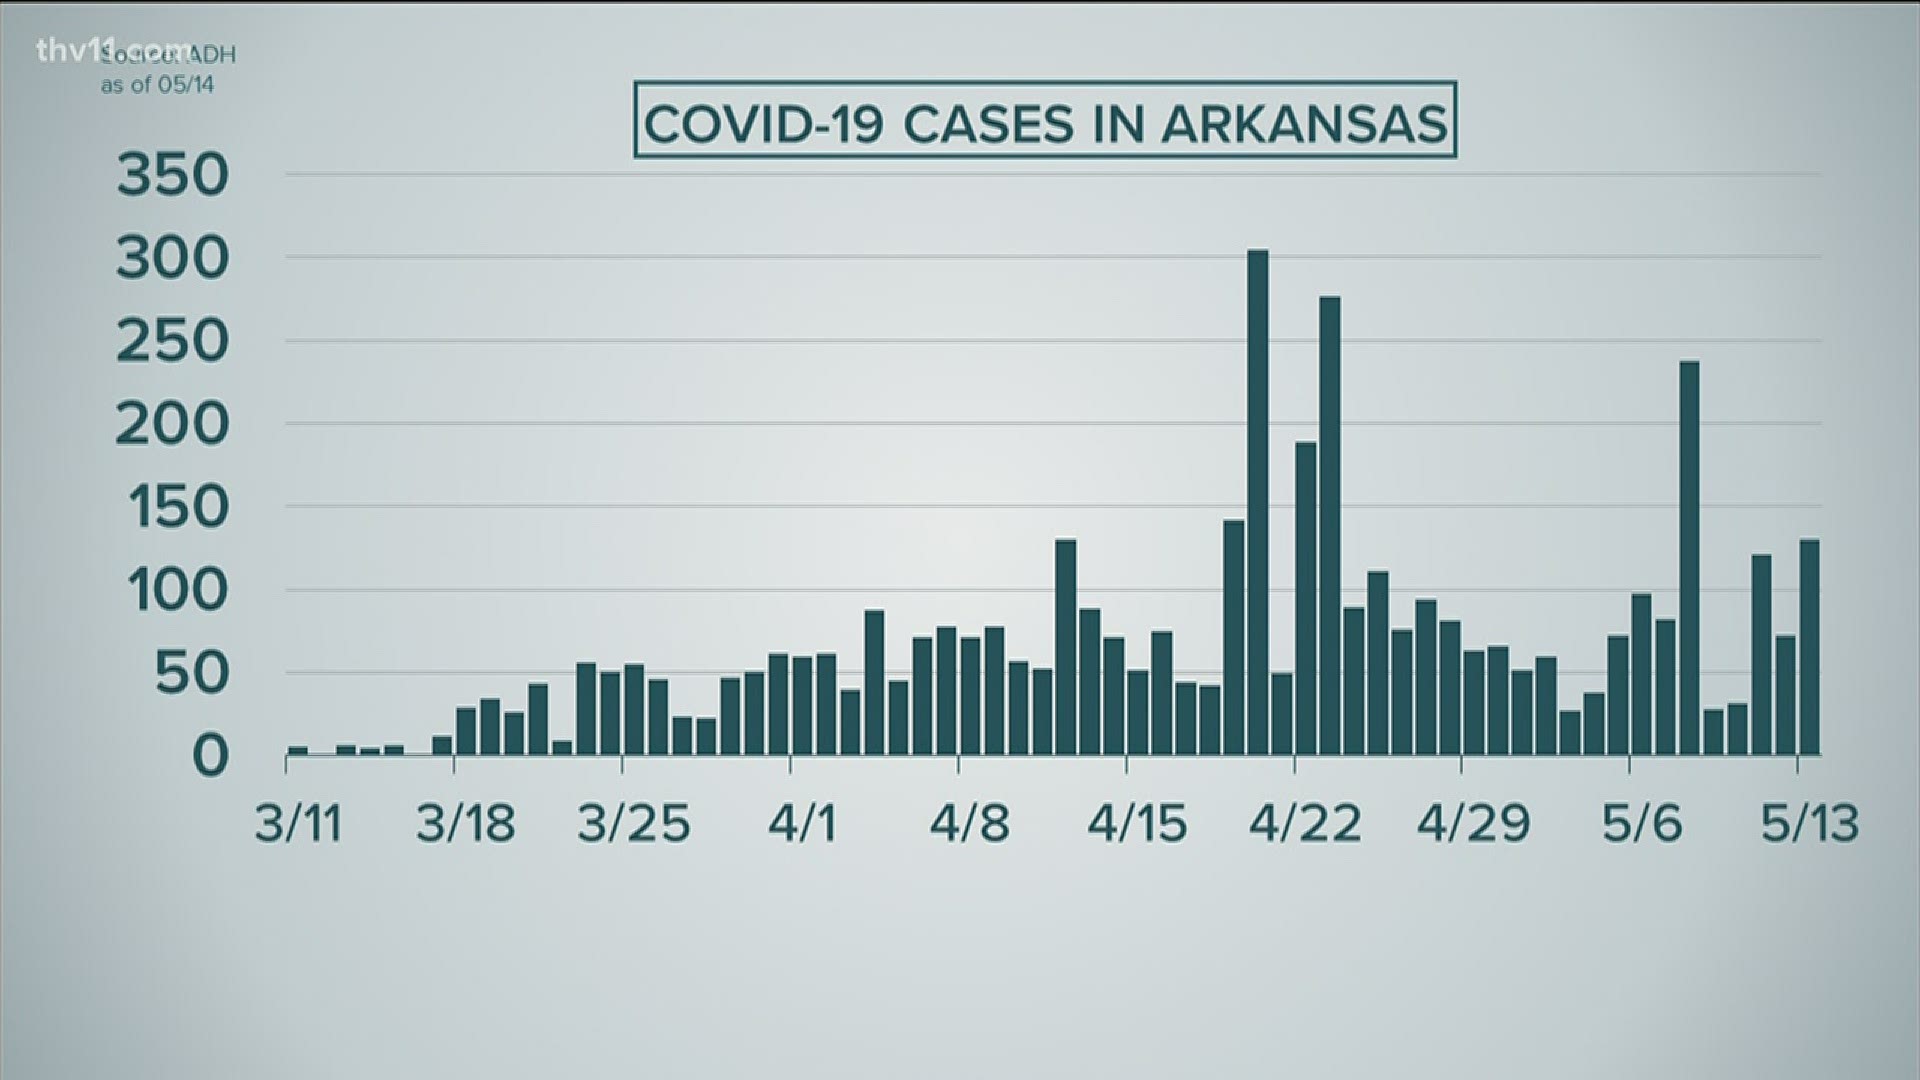 The uptick in cases has Governor Asa Hutchinson saying "not so fast" when it comes to expanded reopening.